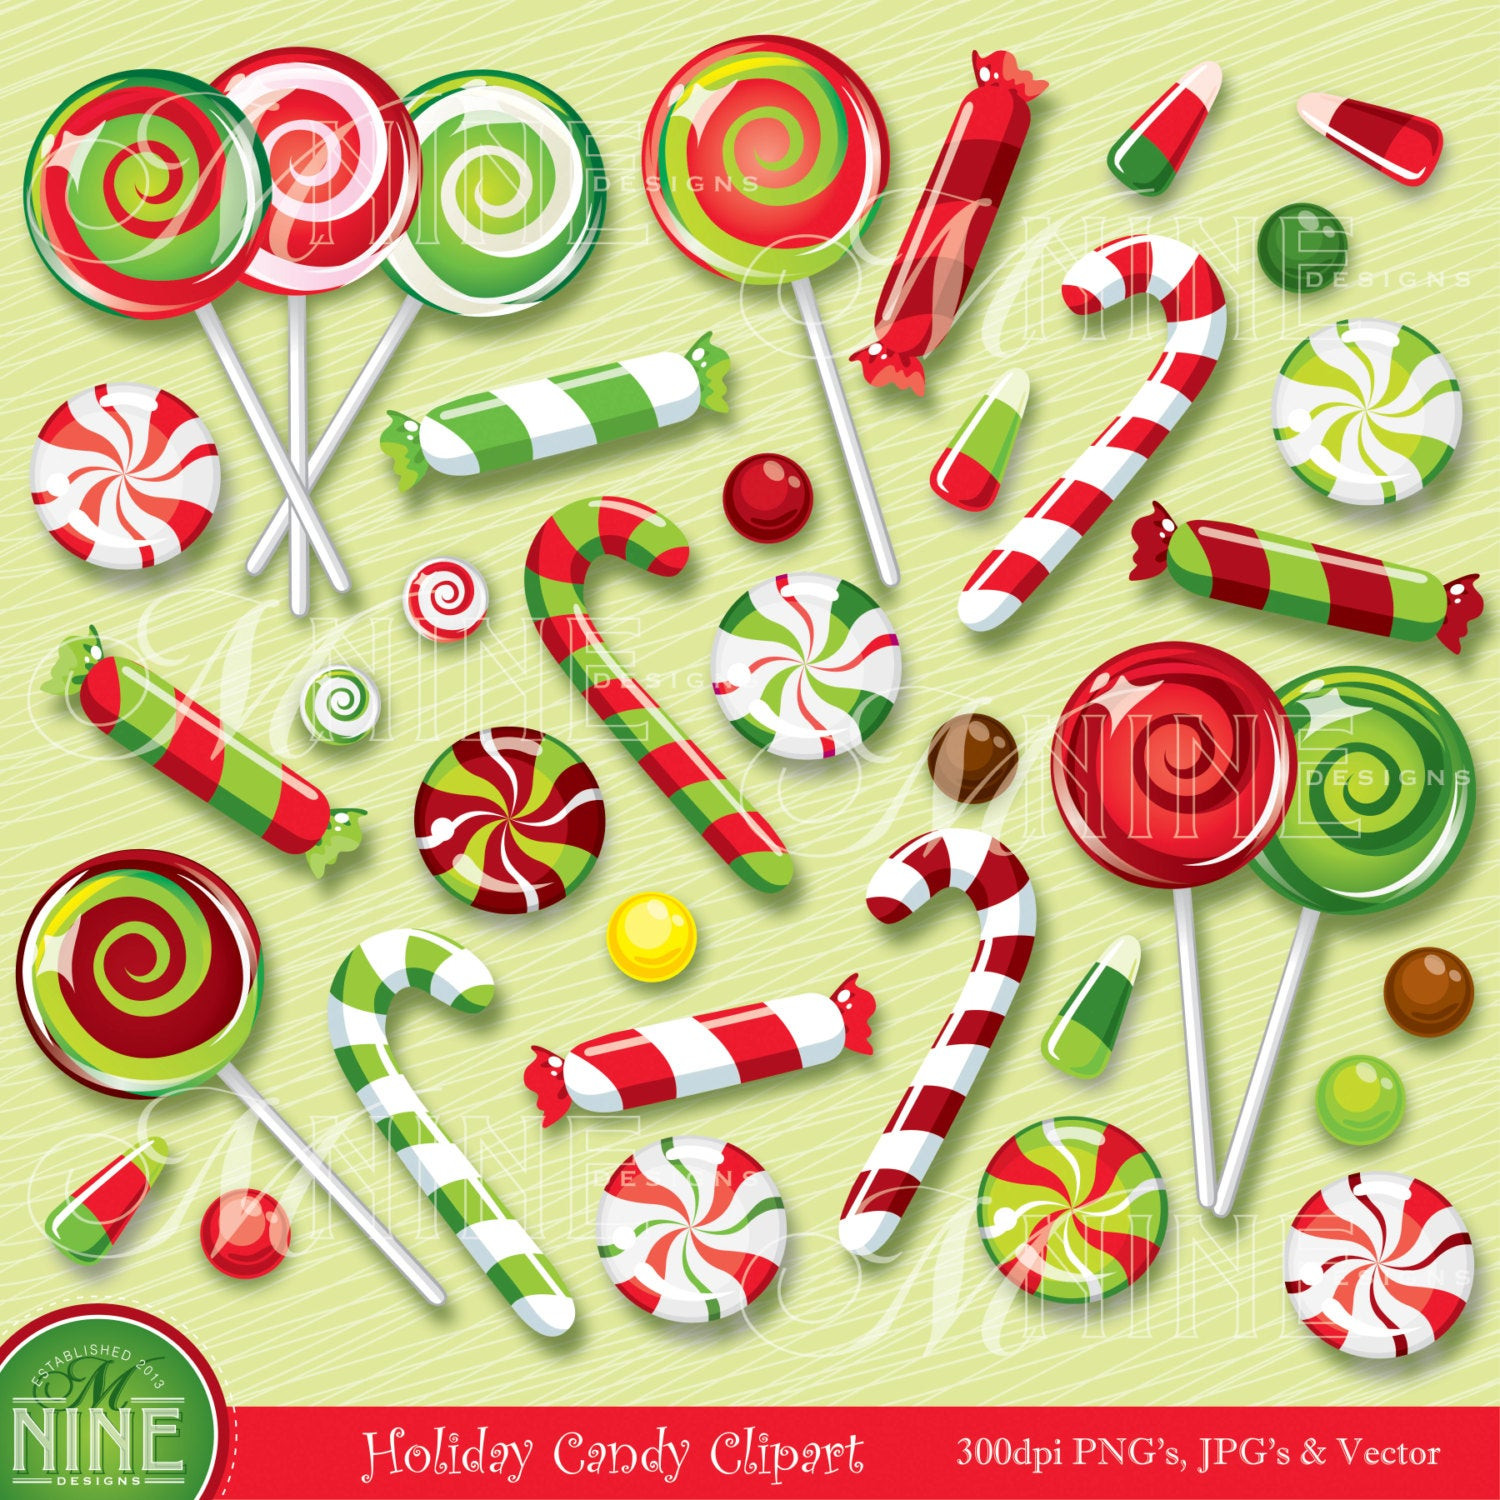 The 21 Best Ideas for Christmas Candy Clipart Home, Family, Style and